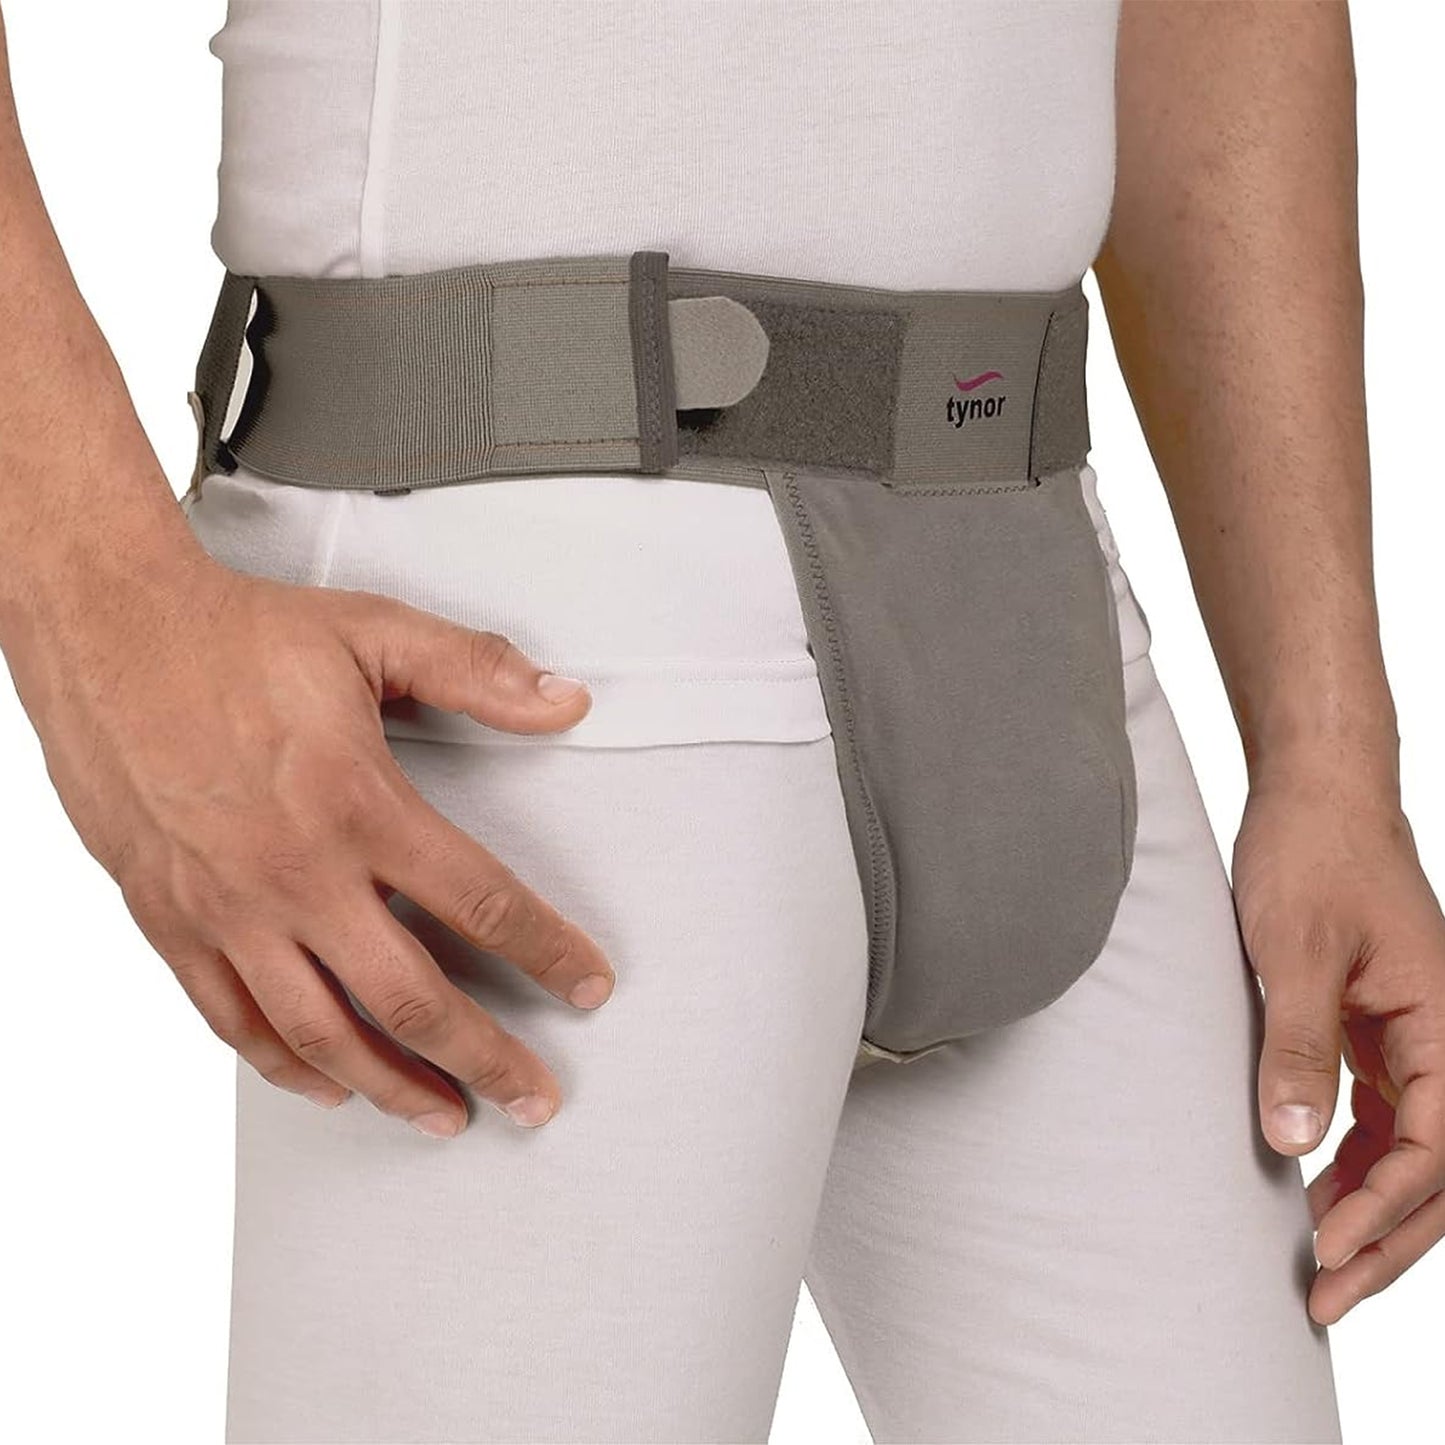 Tynor Scrotal Support - XL